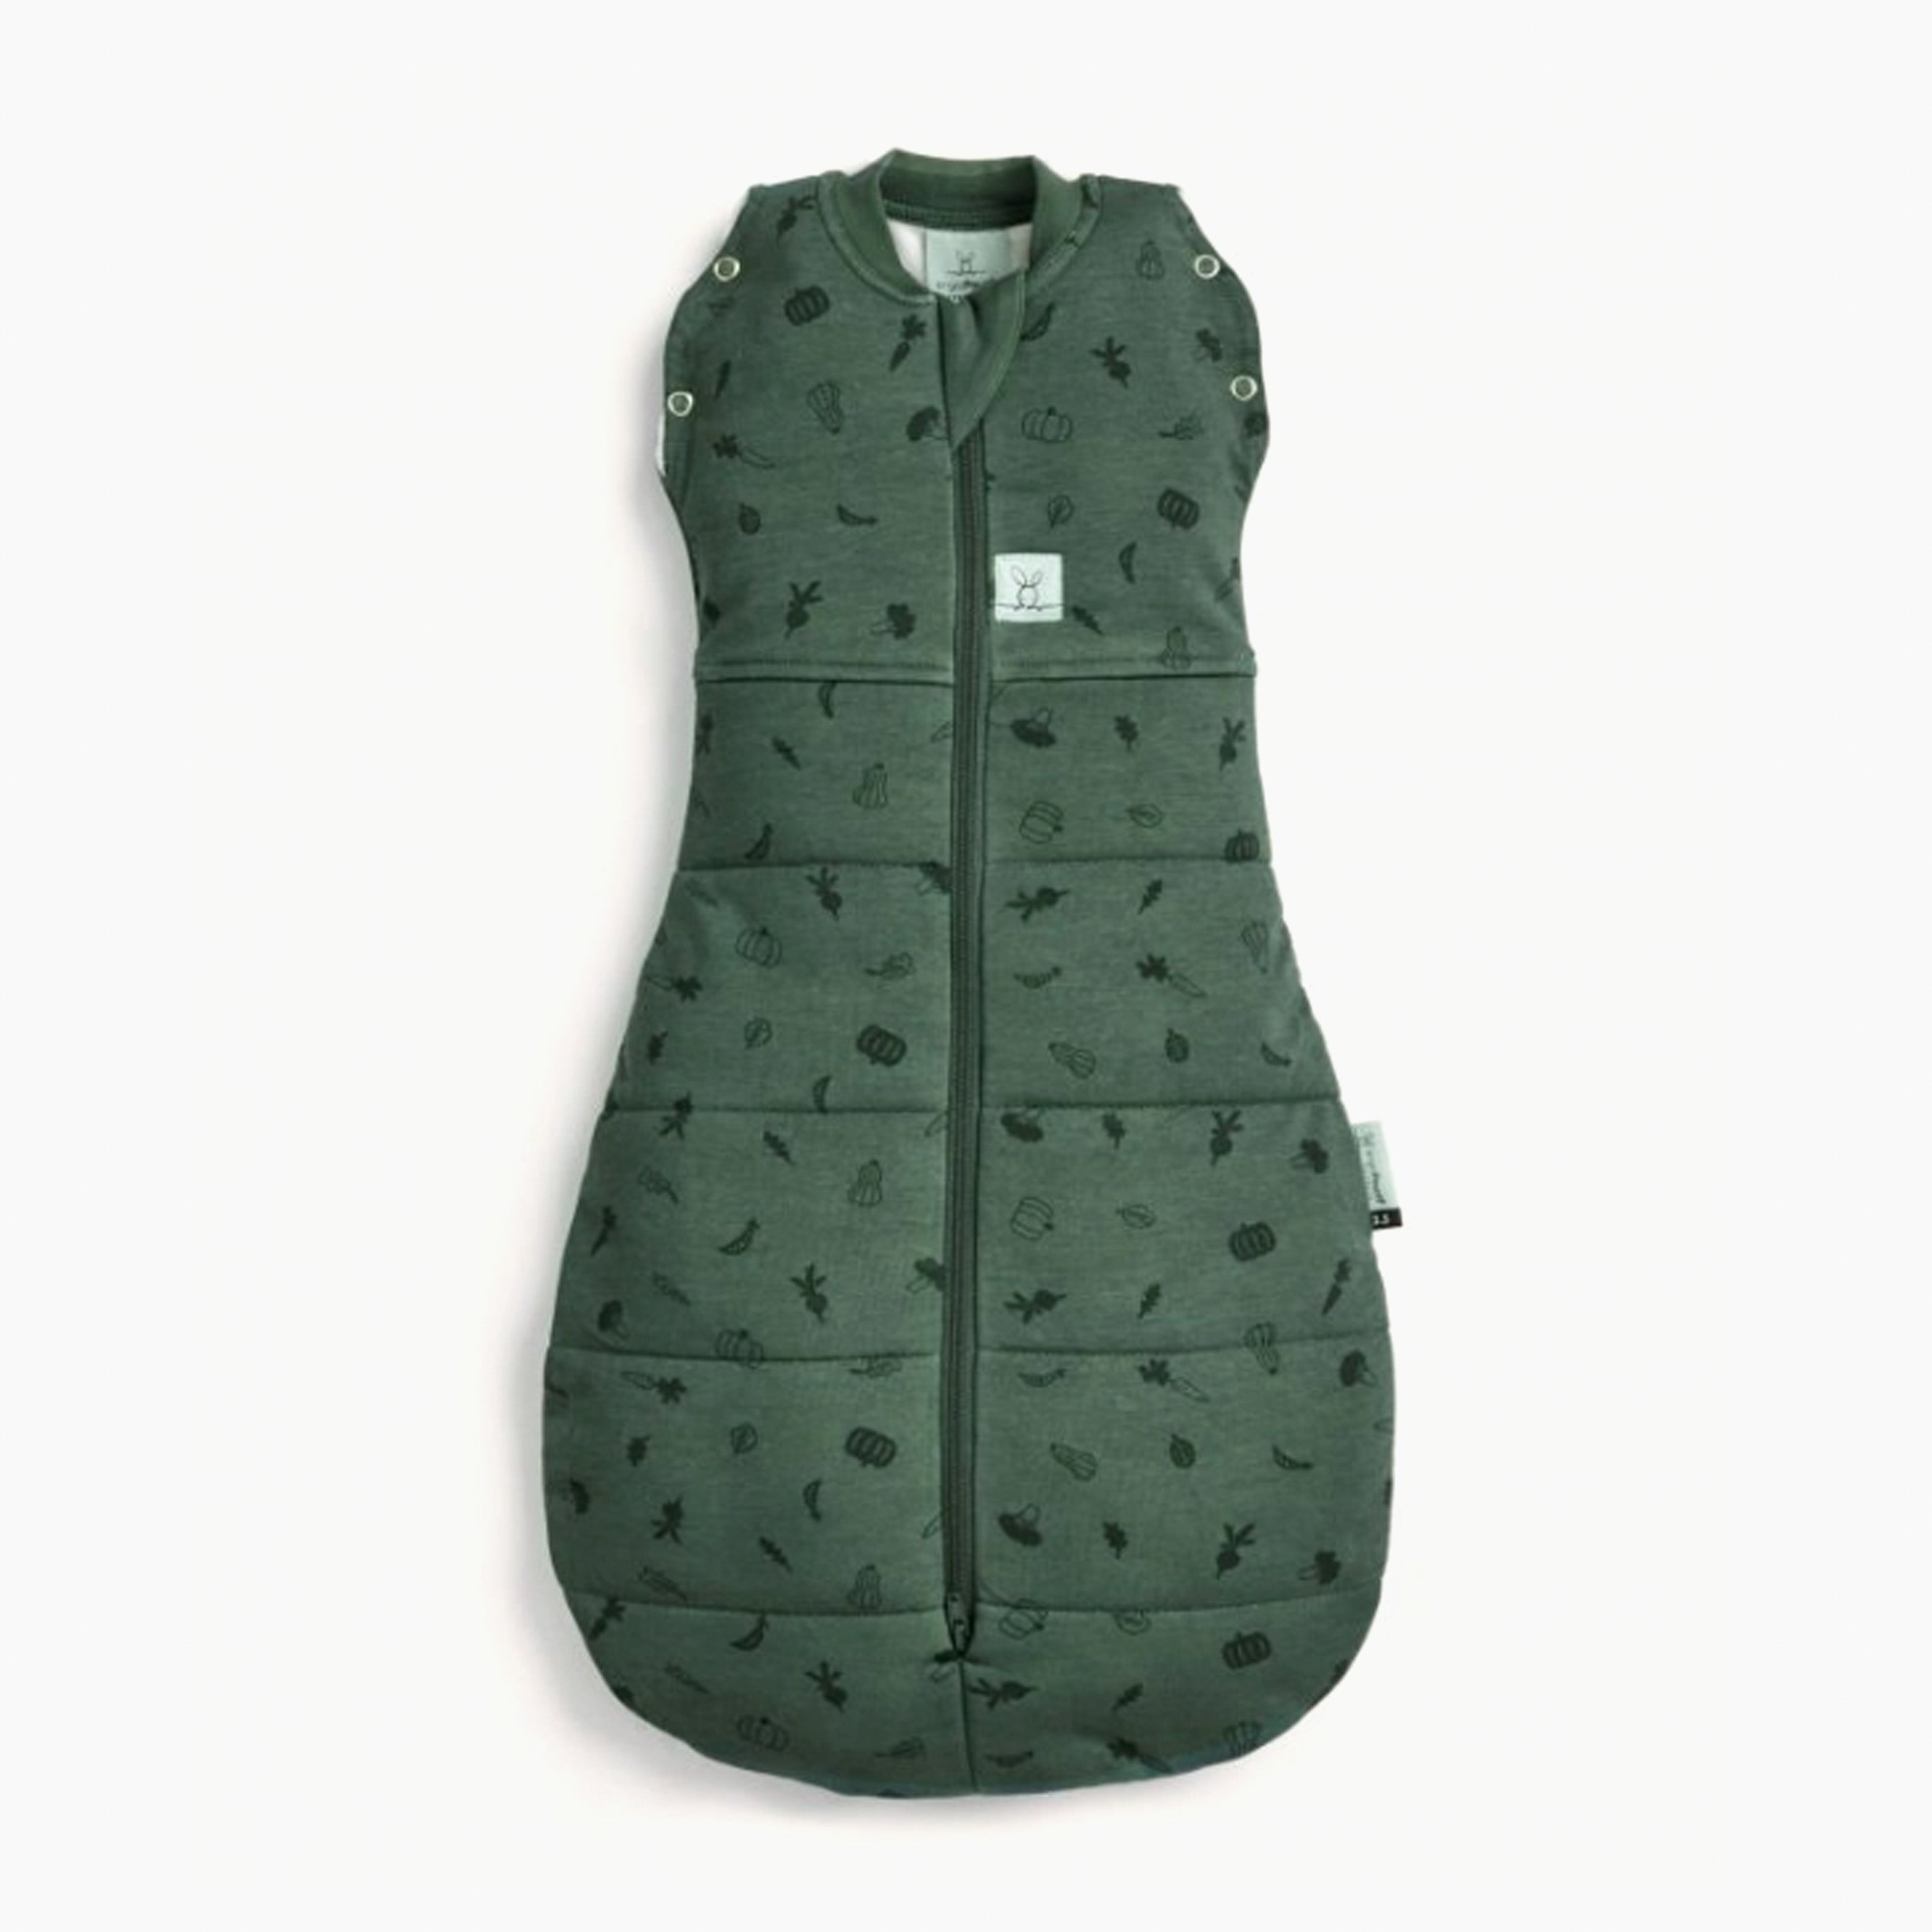 An image of Swaddle Bag - Sleeping Bag - 2.5 TOG Veggie Patch | ergoPouch